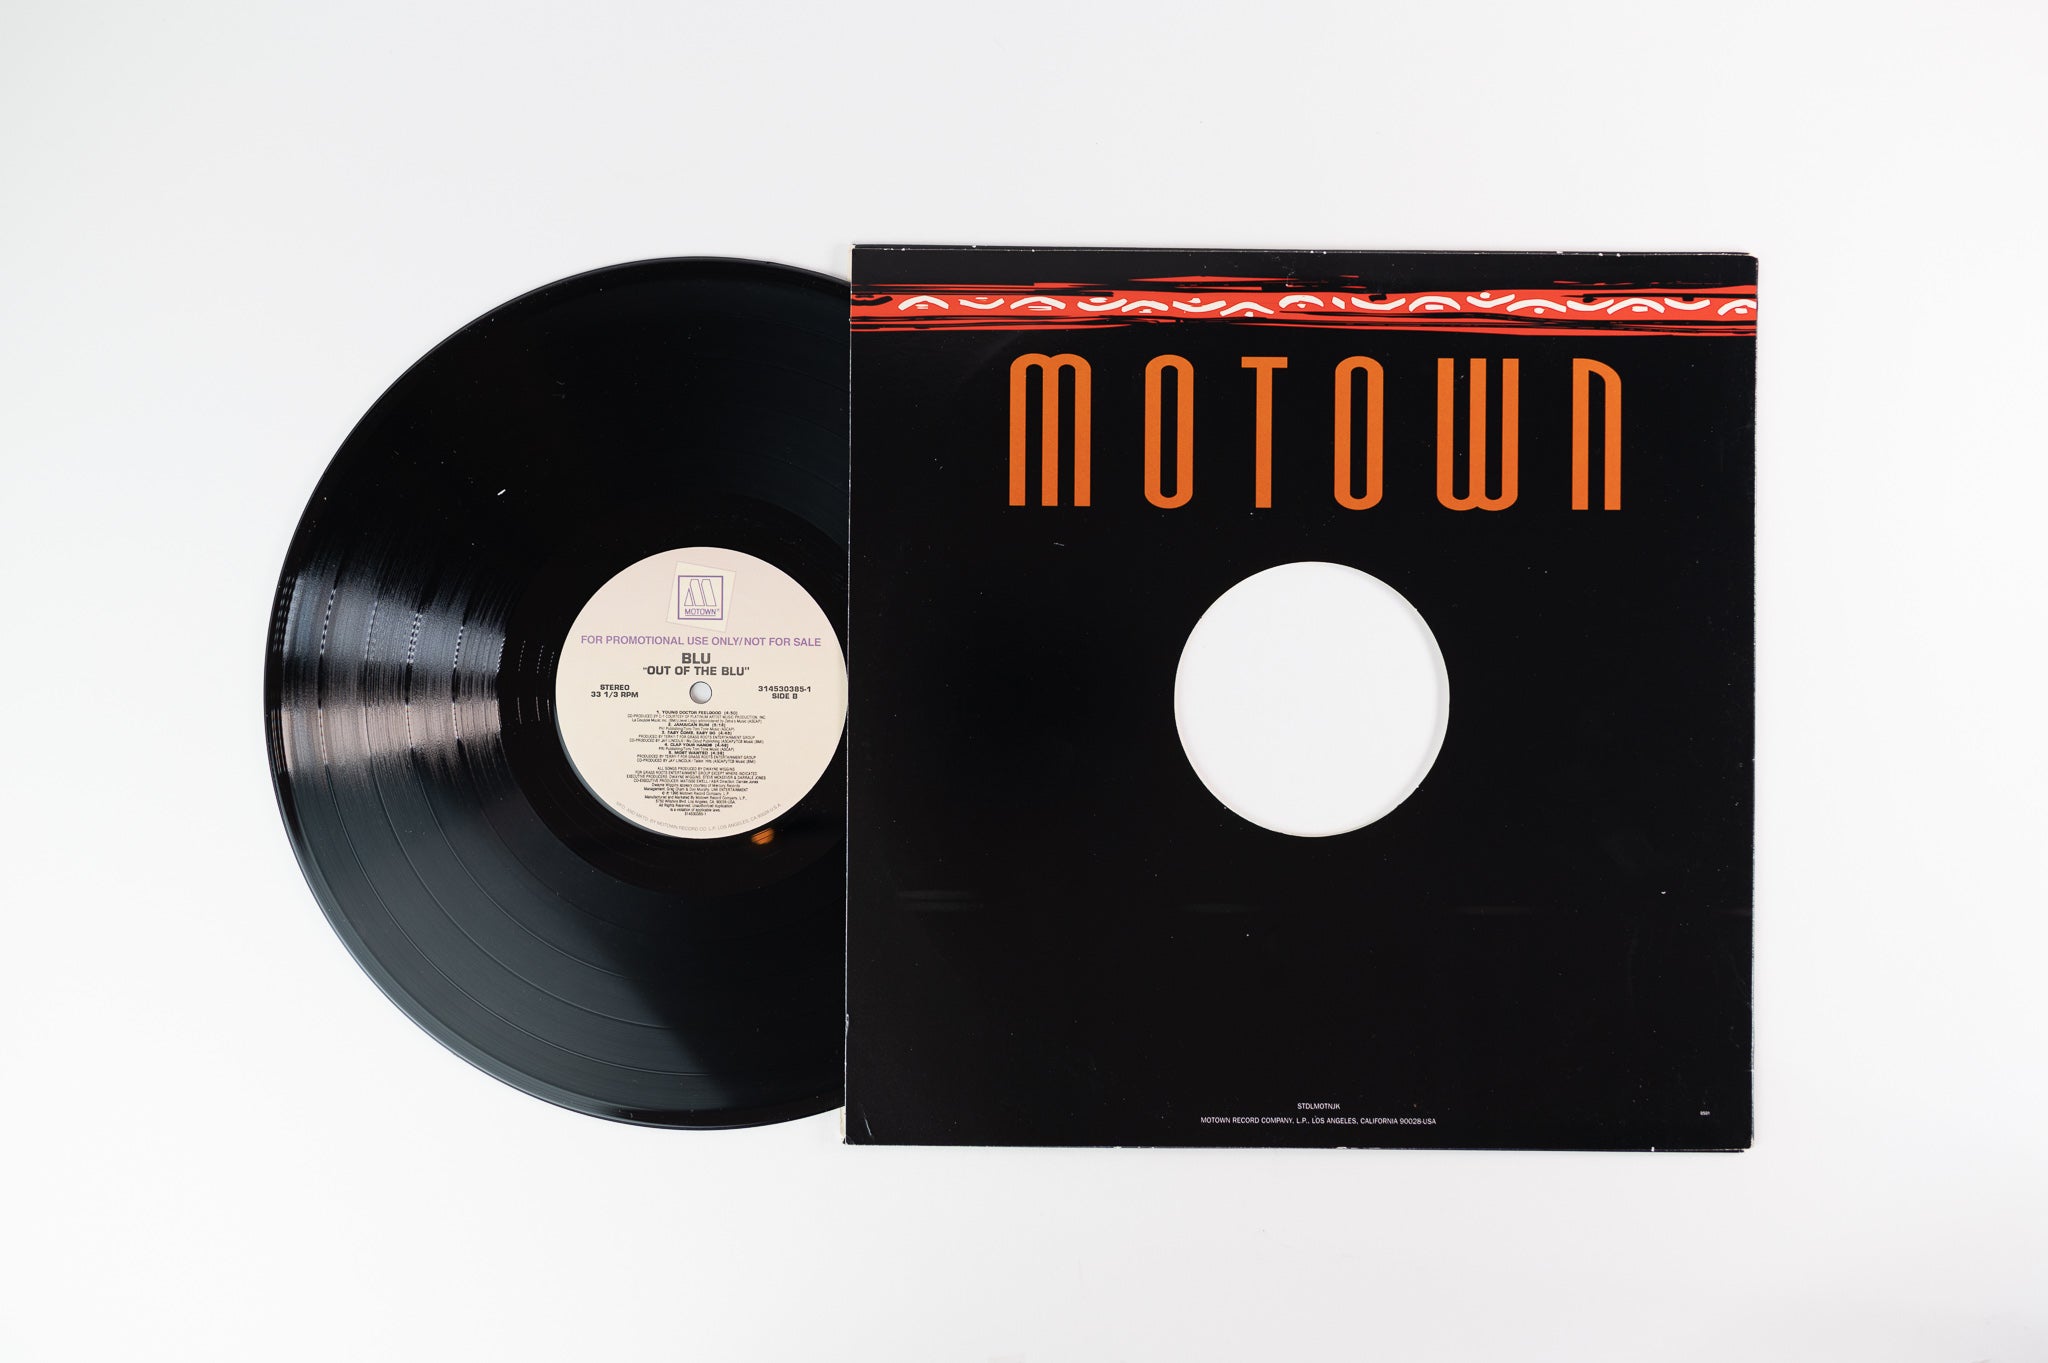 Blu - Out Of The Blu on Motown Promo